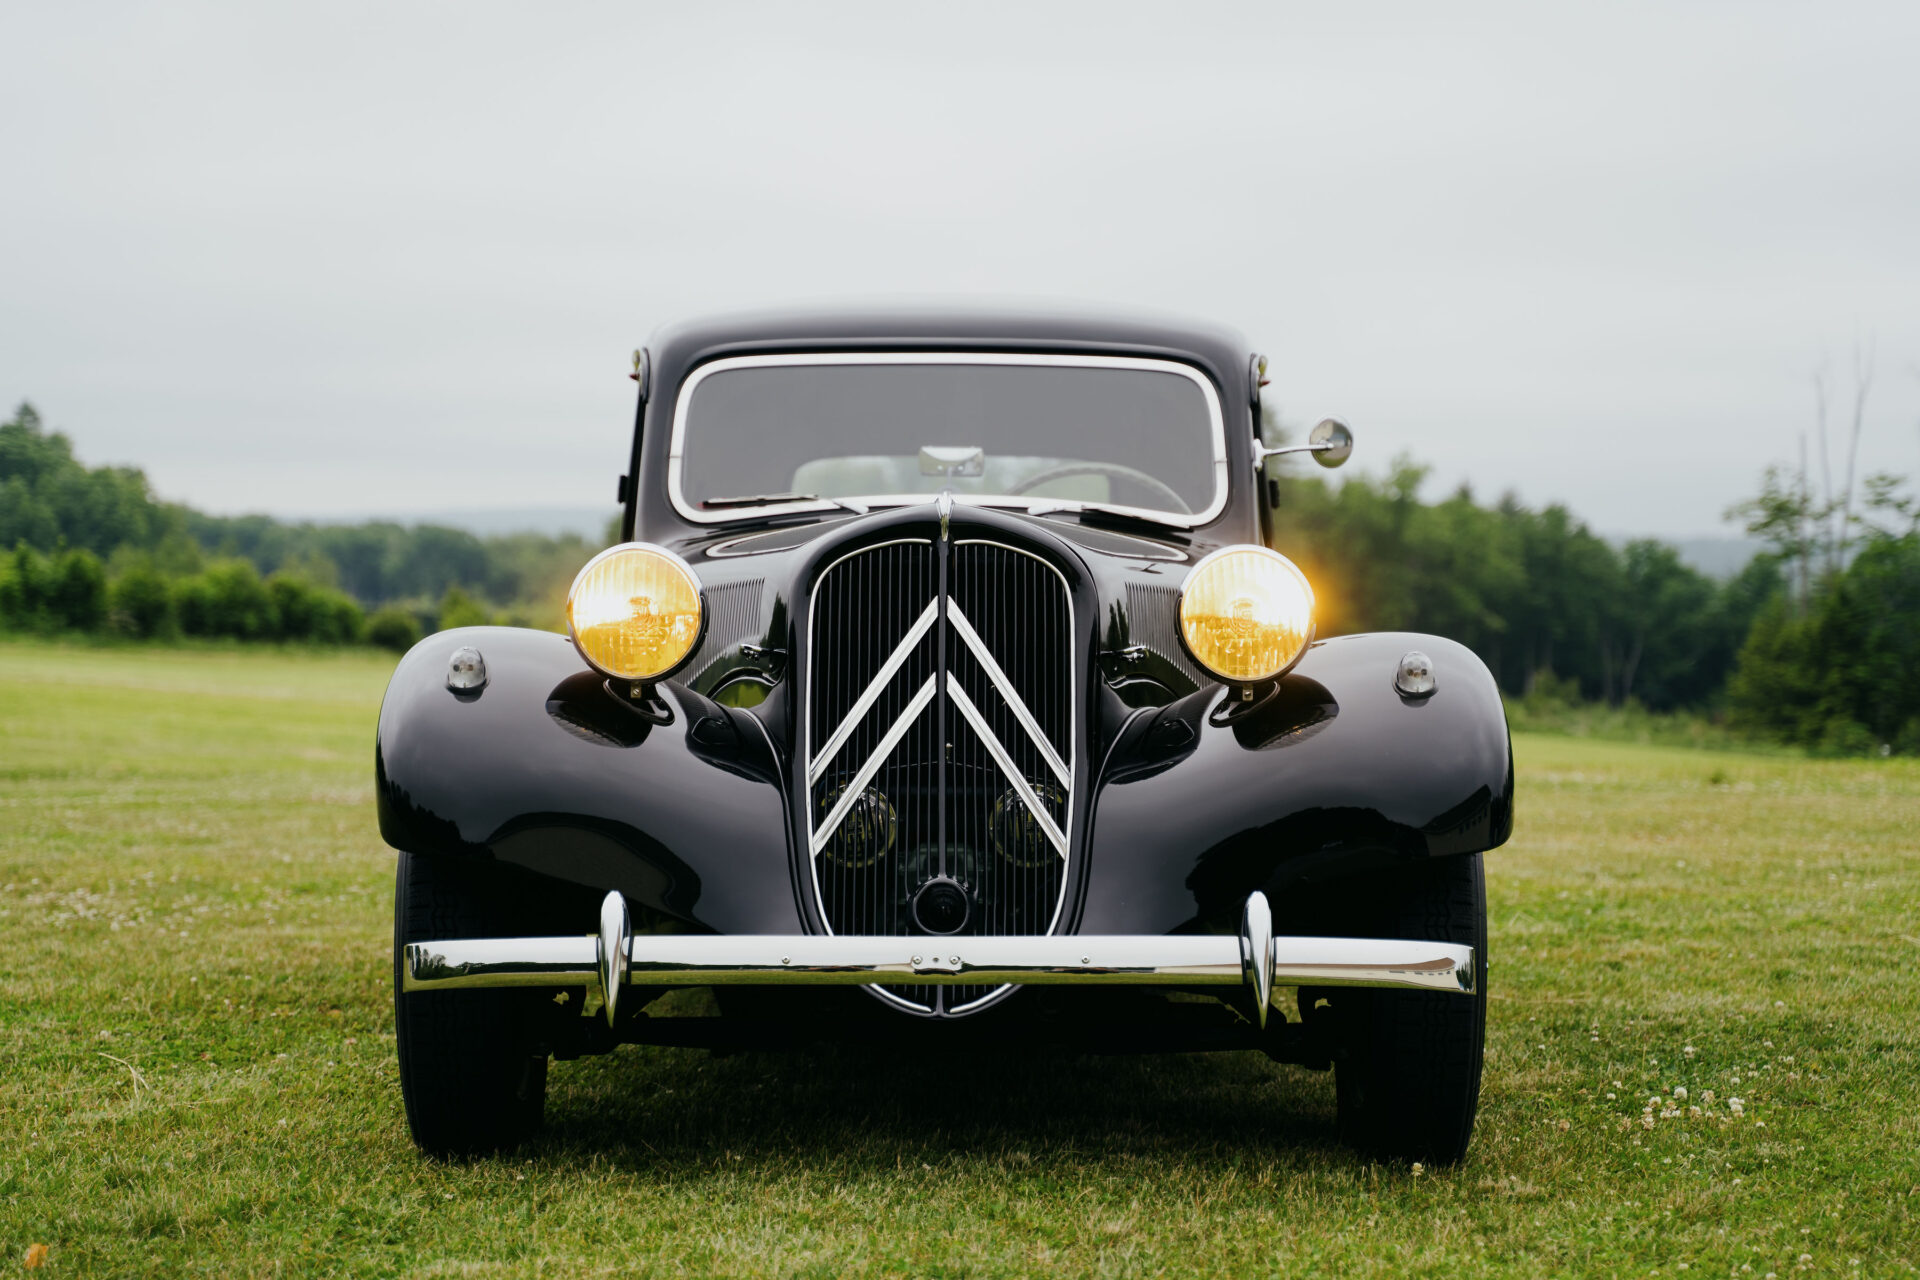 1954 Citroen Traction Avant 11 BL for sale in Candia, NH by Seacoast Specialist Cars, Front